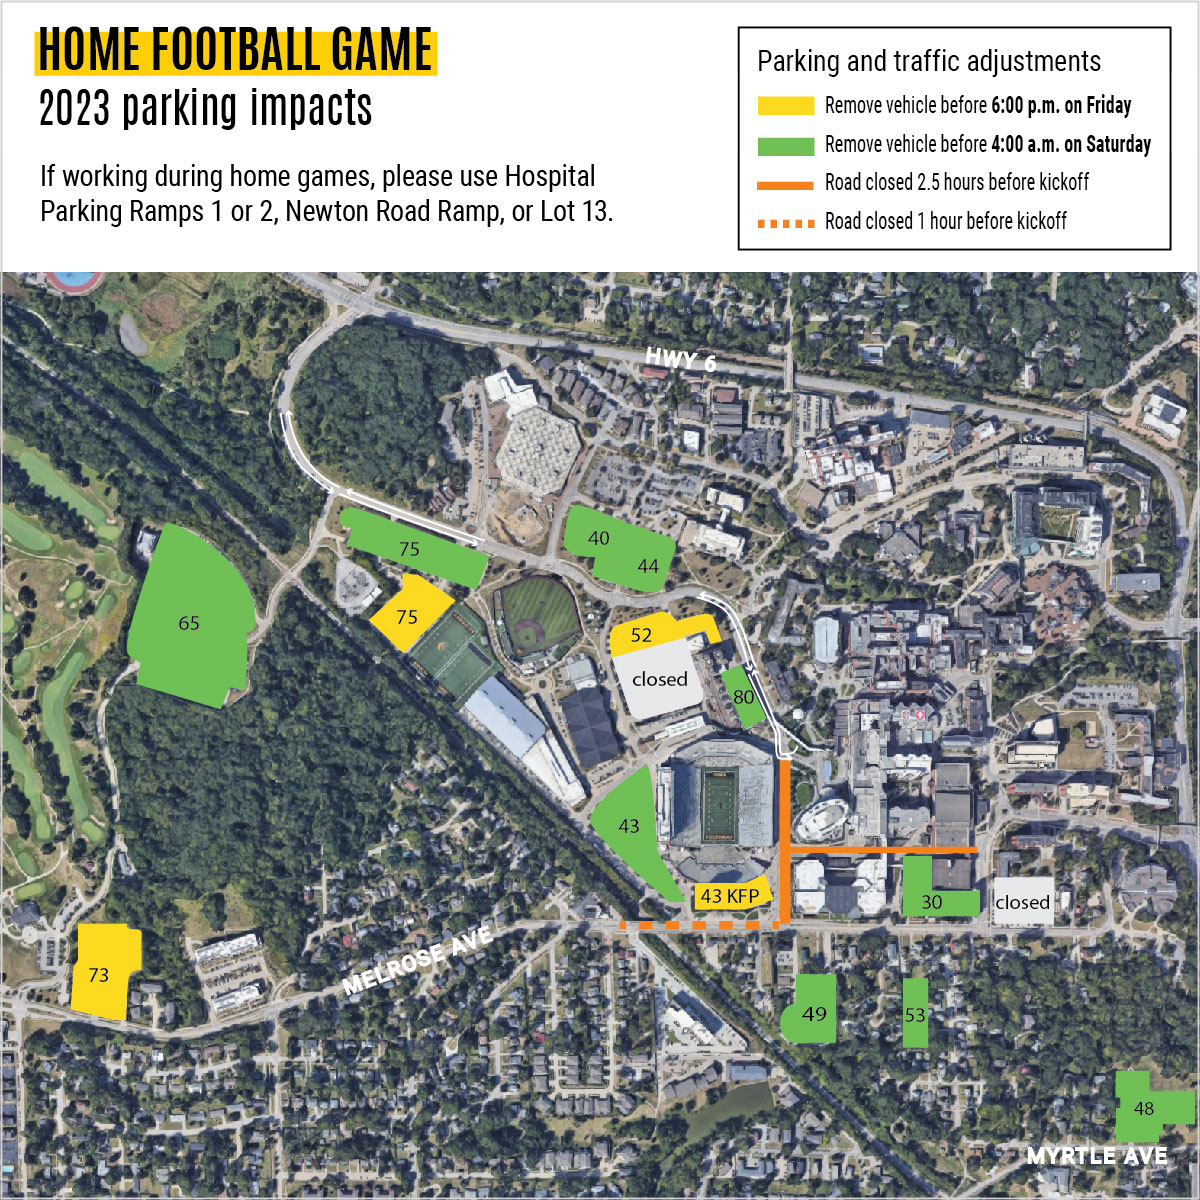 Football map highlighting restrictions for gameday weekends